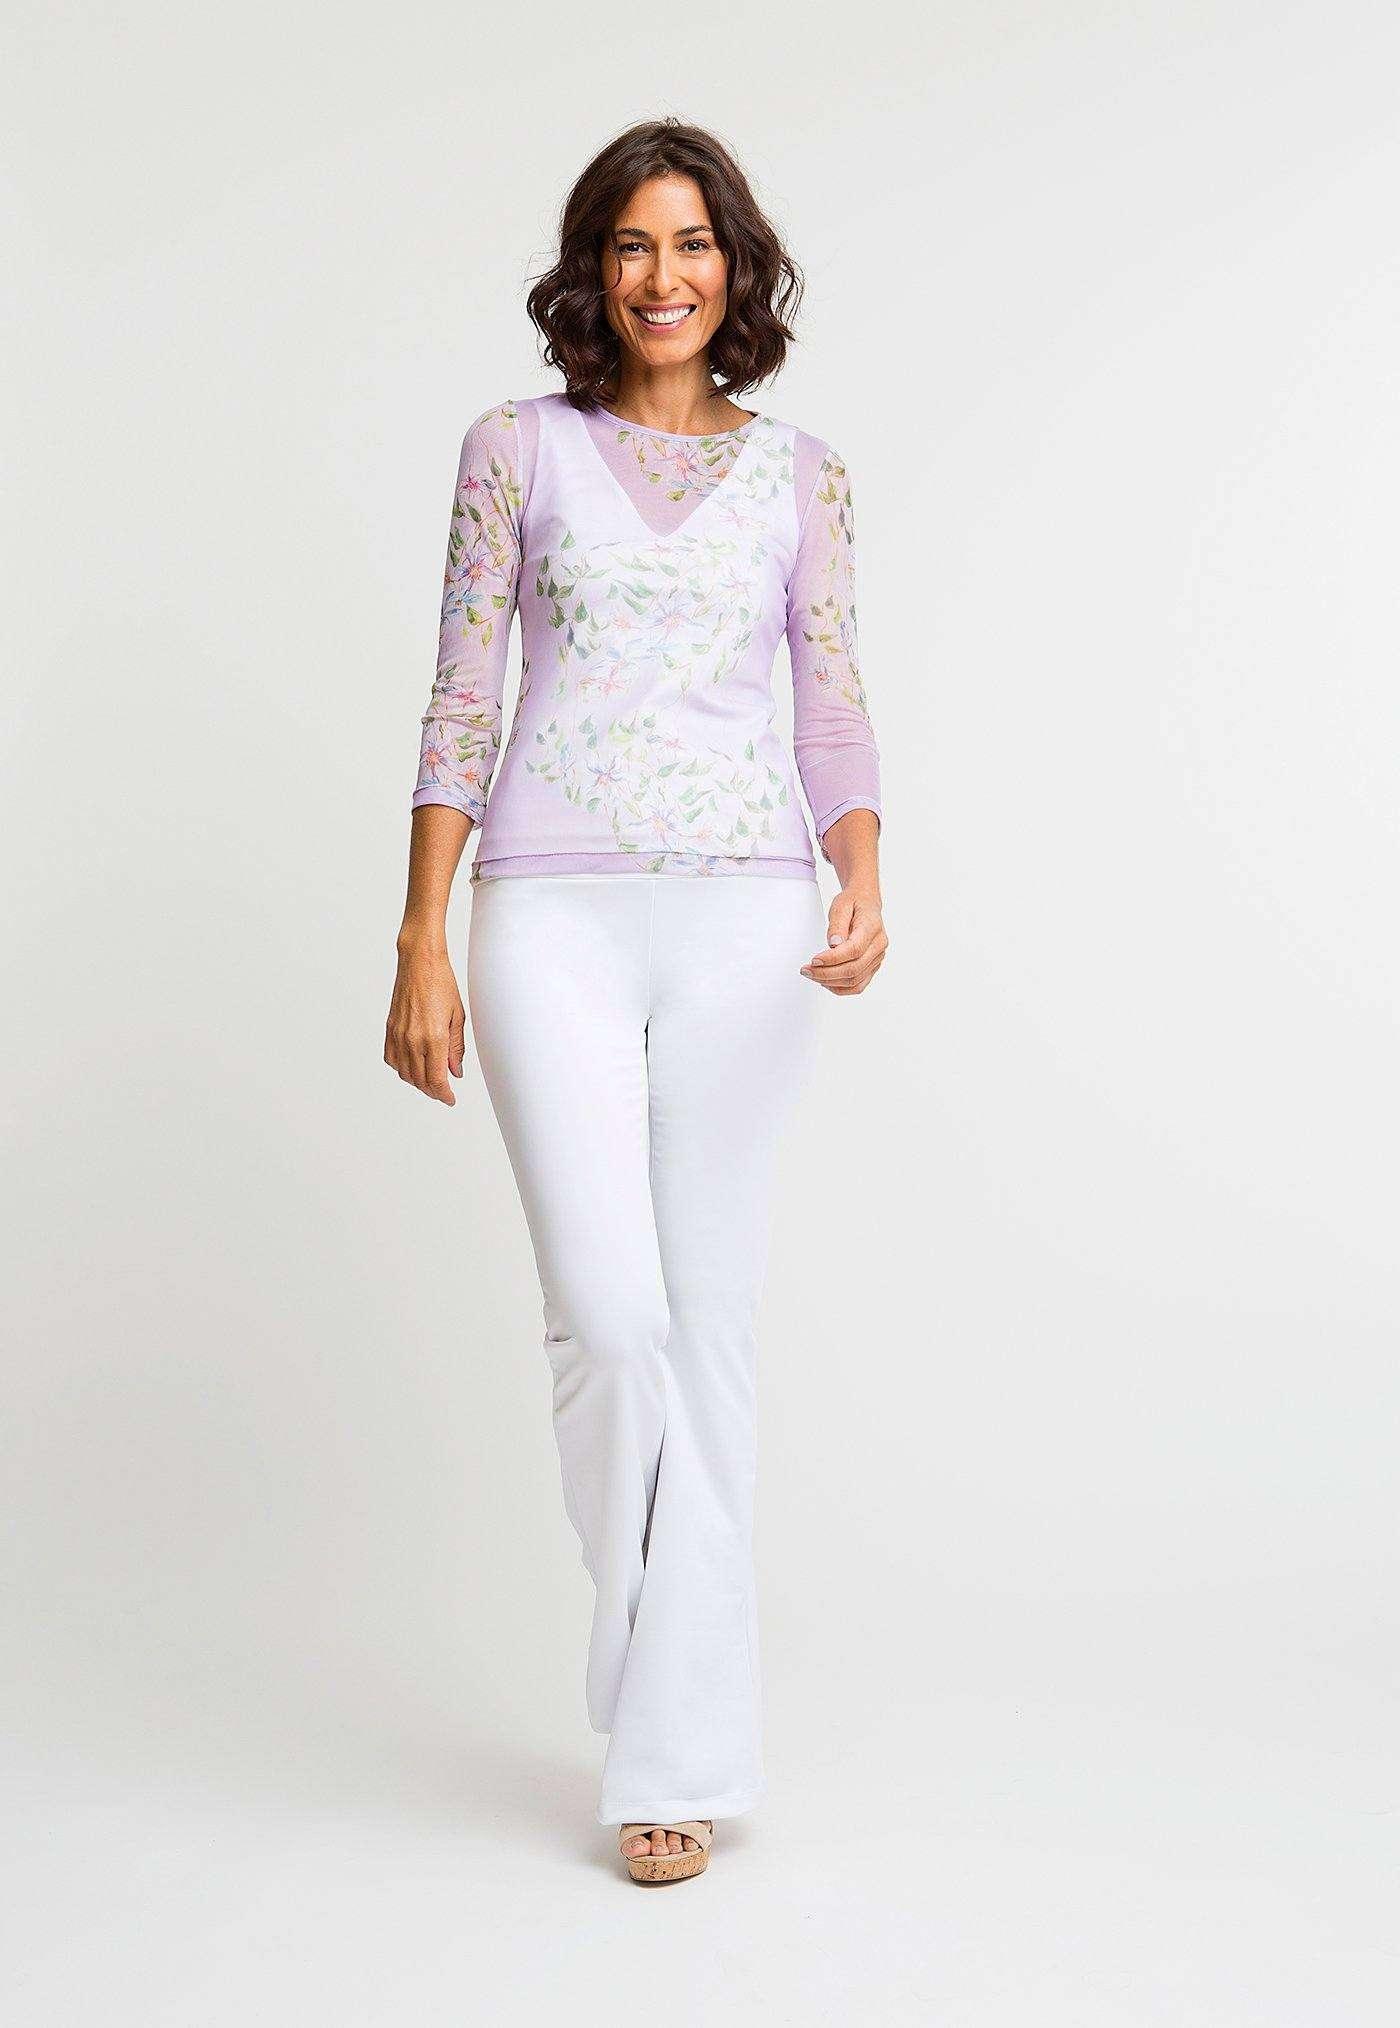 lavender flower printed mesh t shirt with white stretch knit tank top and white stretch knit pants